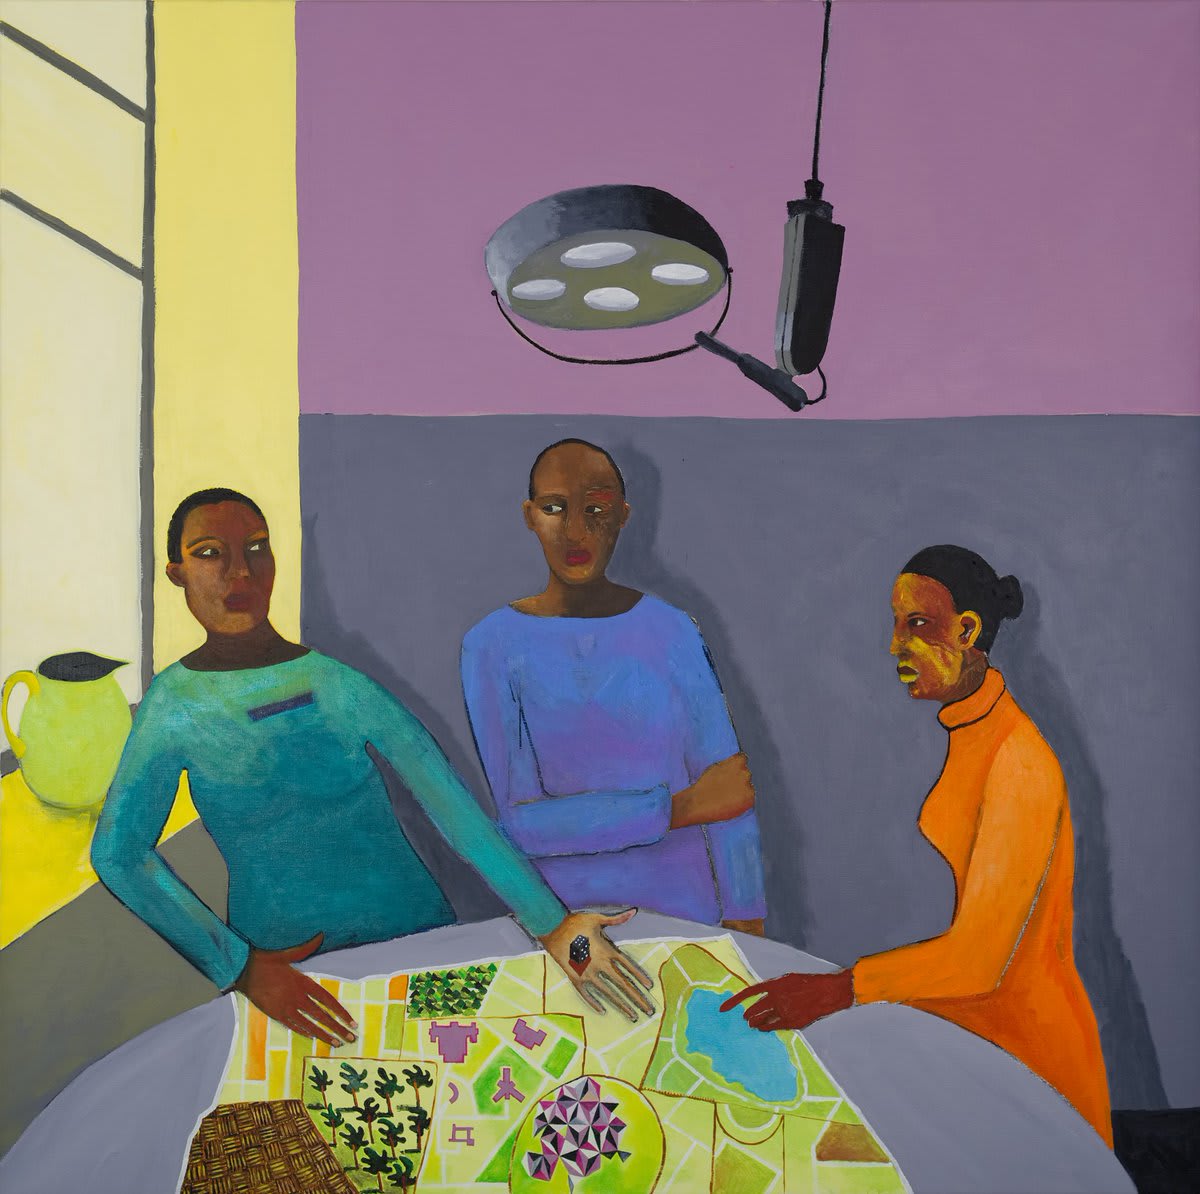 Not long until Lubaina Himid's major exhibition unfolds at Tate Modern. Her theatrical paintings fill everyday life with colour while amplifying overlooked histories. ️ https://t.co/DiajiwC6nU ️ LubainaHimid, The Operating Table 2019. Collection of Judi Roaman & Carla Chammas